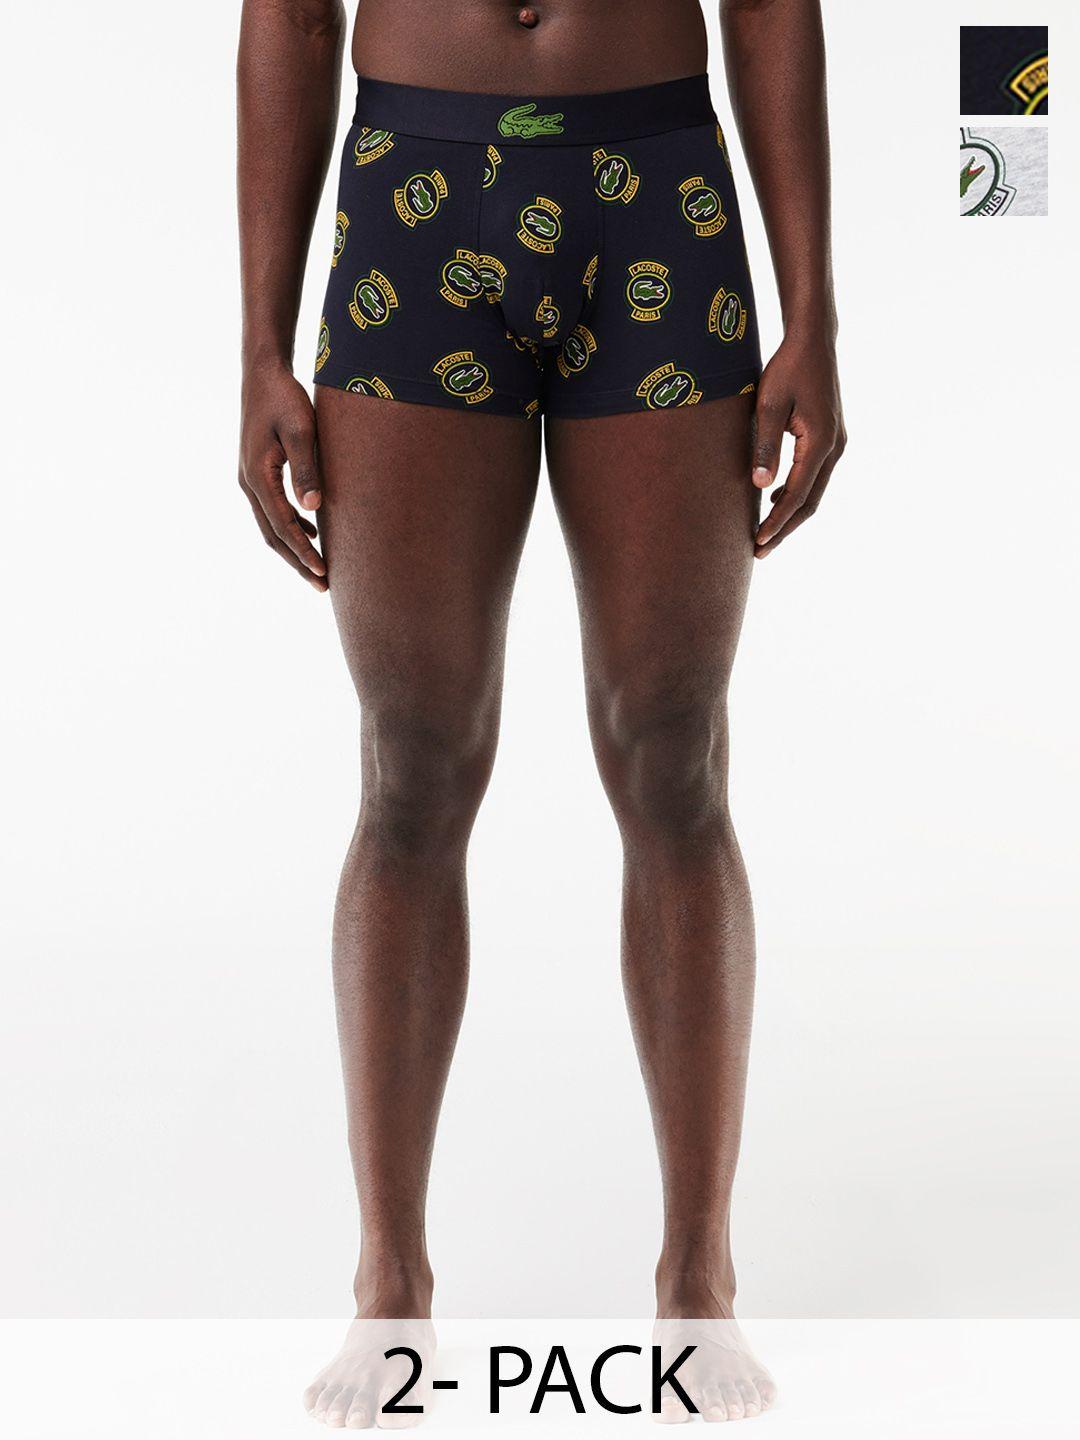 lacoste-stretch-jersey-pack-of-2-printed-trunks-5h8396kg2-s